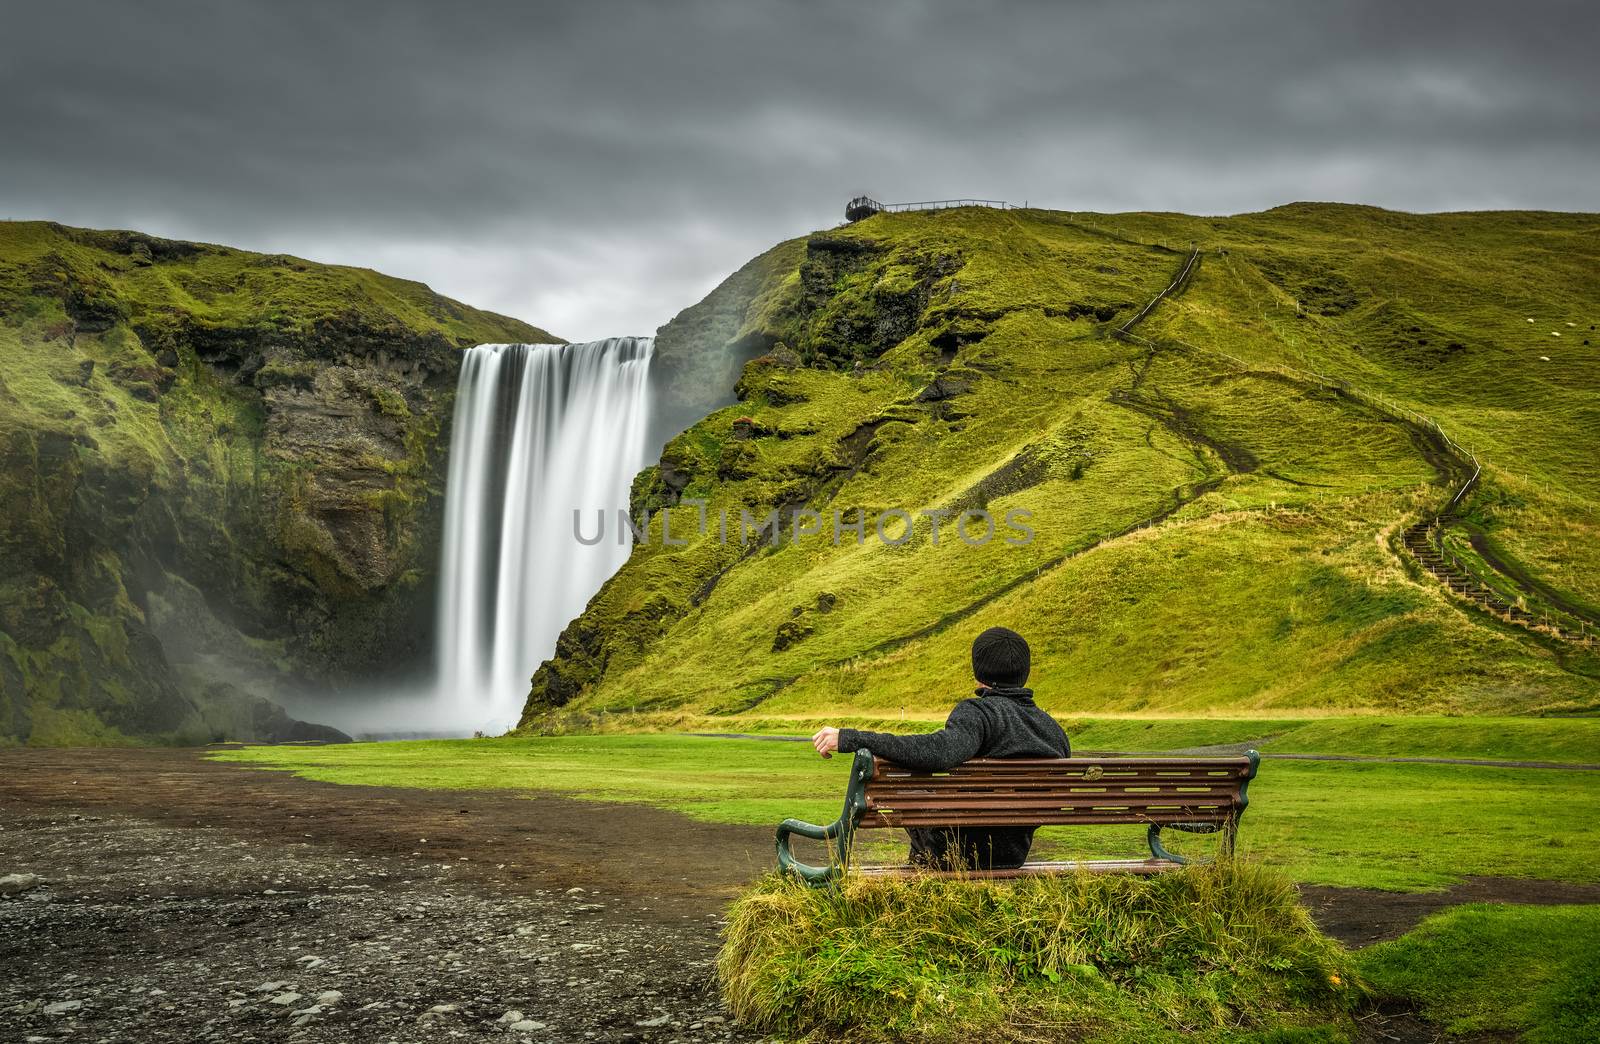 Hiker at the Skogafoss waterfall in southern Iceland by nickfox